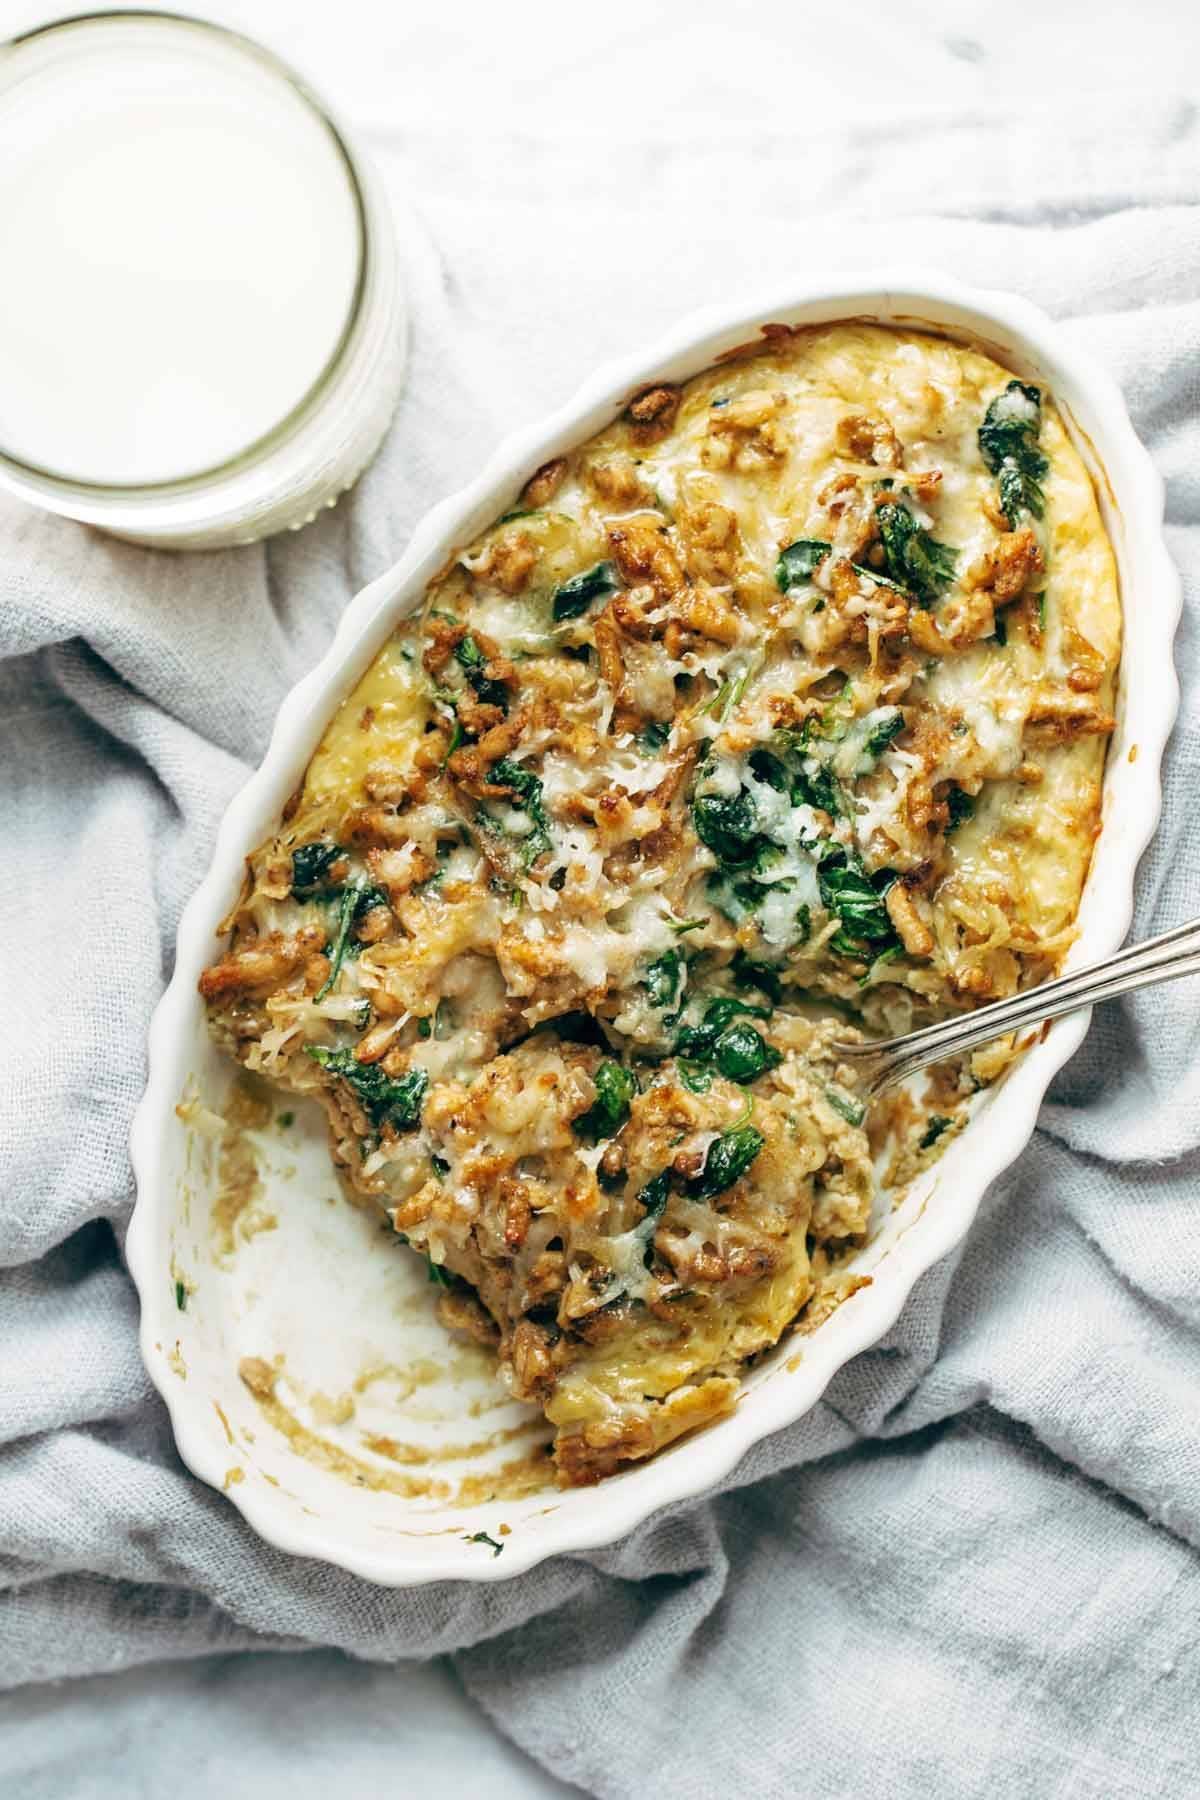 Breakfast Casserole with sausage, eggs, potatoes, spinach, and cheese! Super easy recipe that's ready in 30 minutes and high in protein. | pinchofyum.com